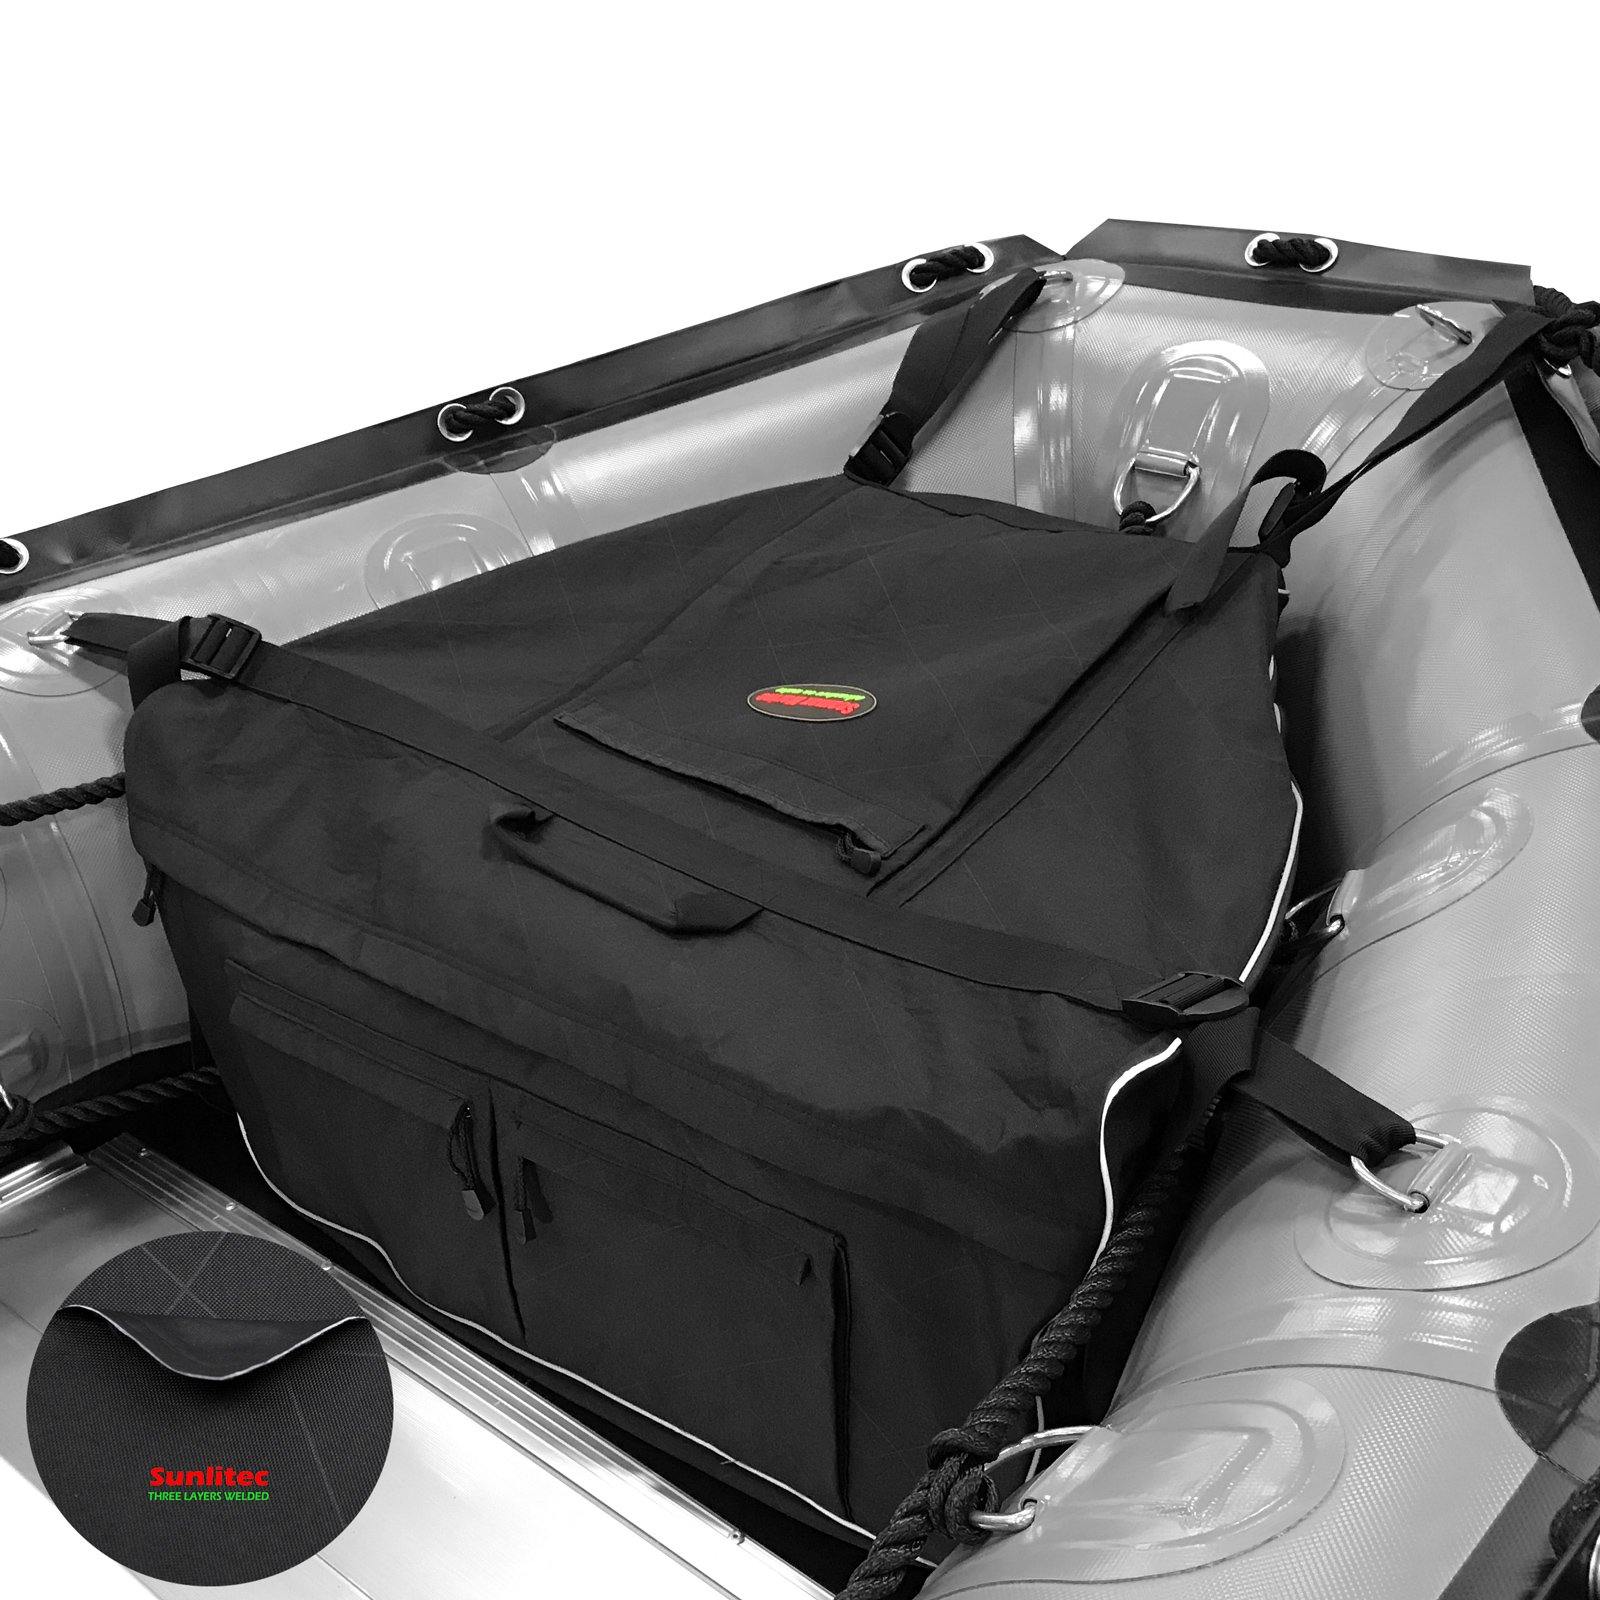 Seamax Sunlitec Front Accessory Storage Bow Bag for Inflatable Boat, with Reflective Line